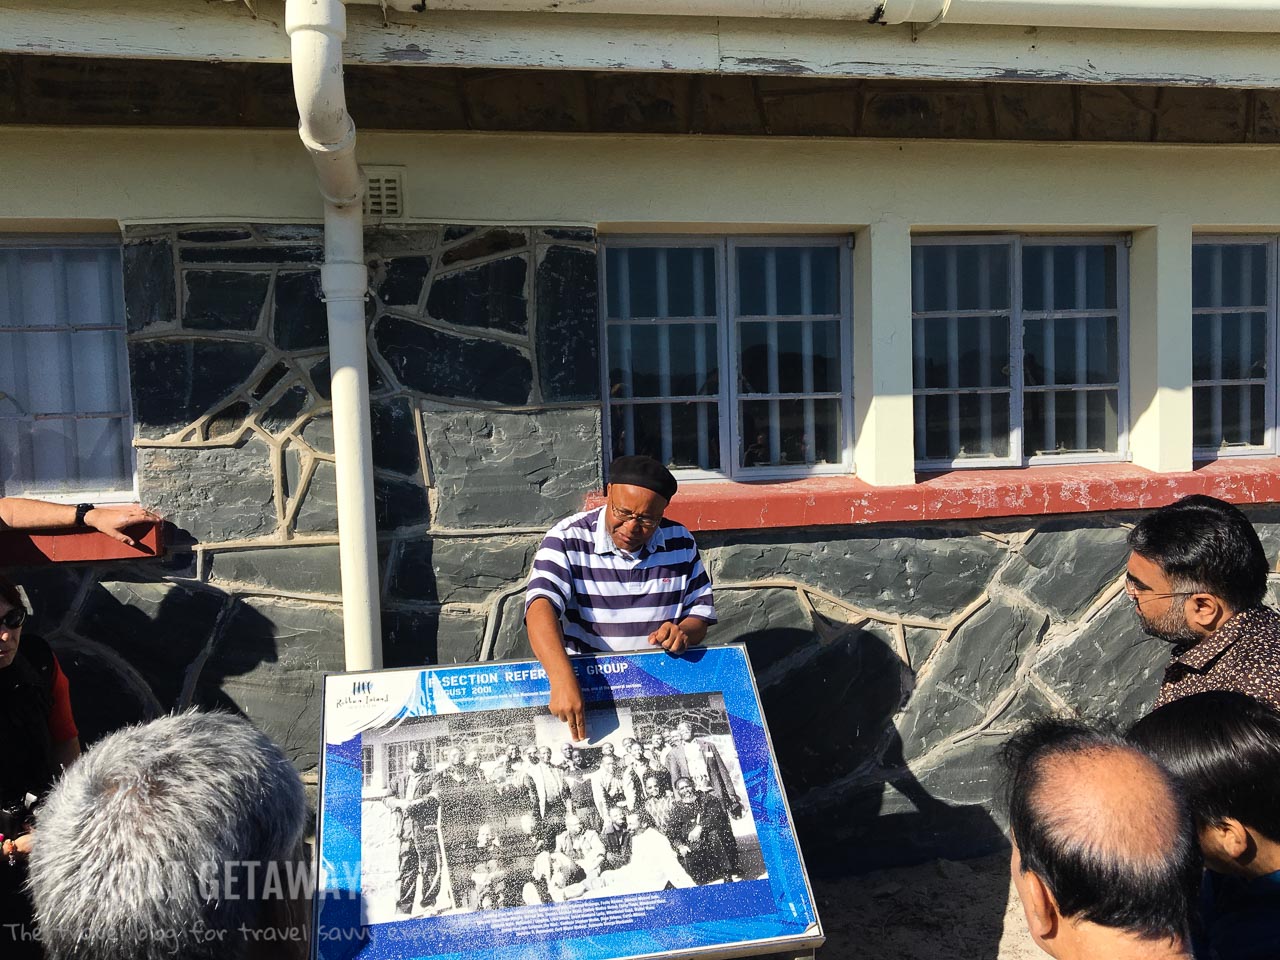 Hearing from a former political prisoner in the maximum security prison on Robben Island is a very moving experience for your visit to Cape Town, South Africa. Expat Getaways Expat Getaways One Week in Cape Town.